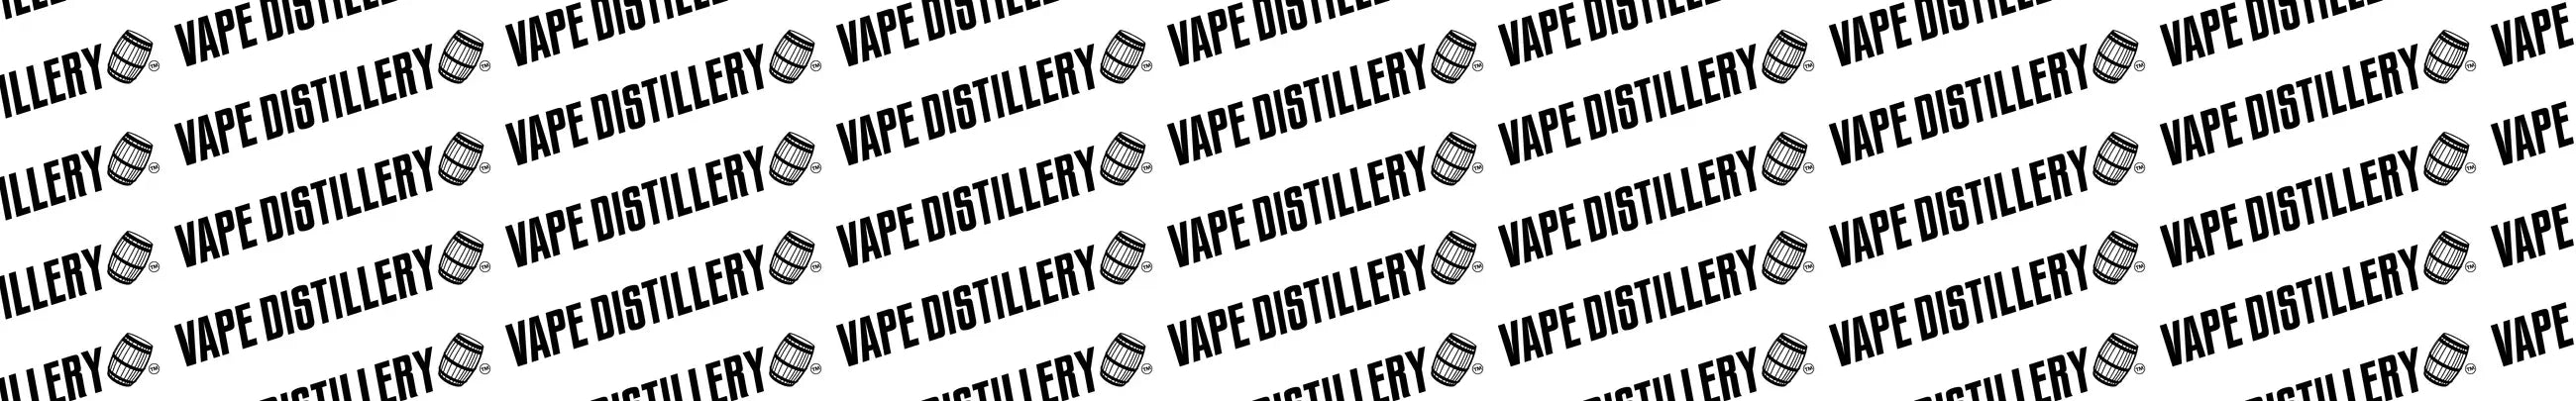 Vape Distillery is the UK's leading provider of premium e-liquids. They offer a wide variety of flavours and sizes to satisfy vapers of every possible calibre!